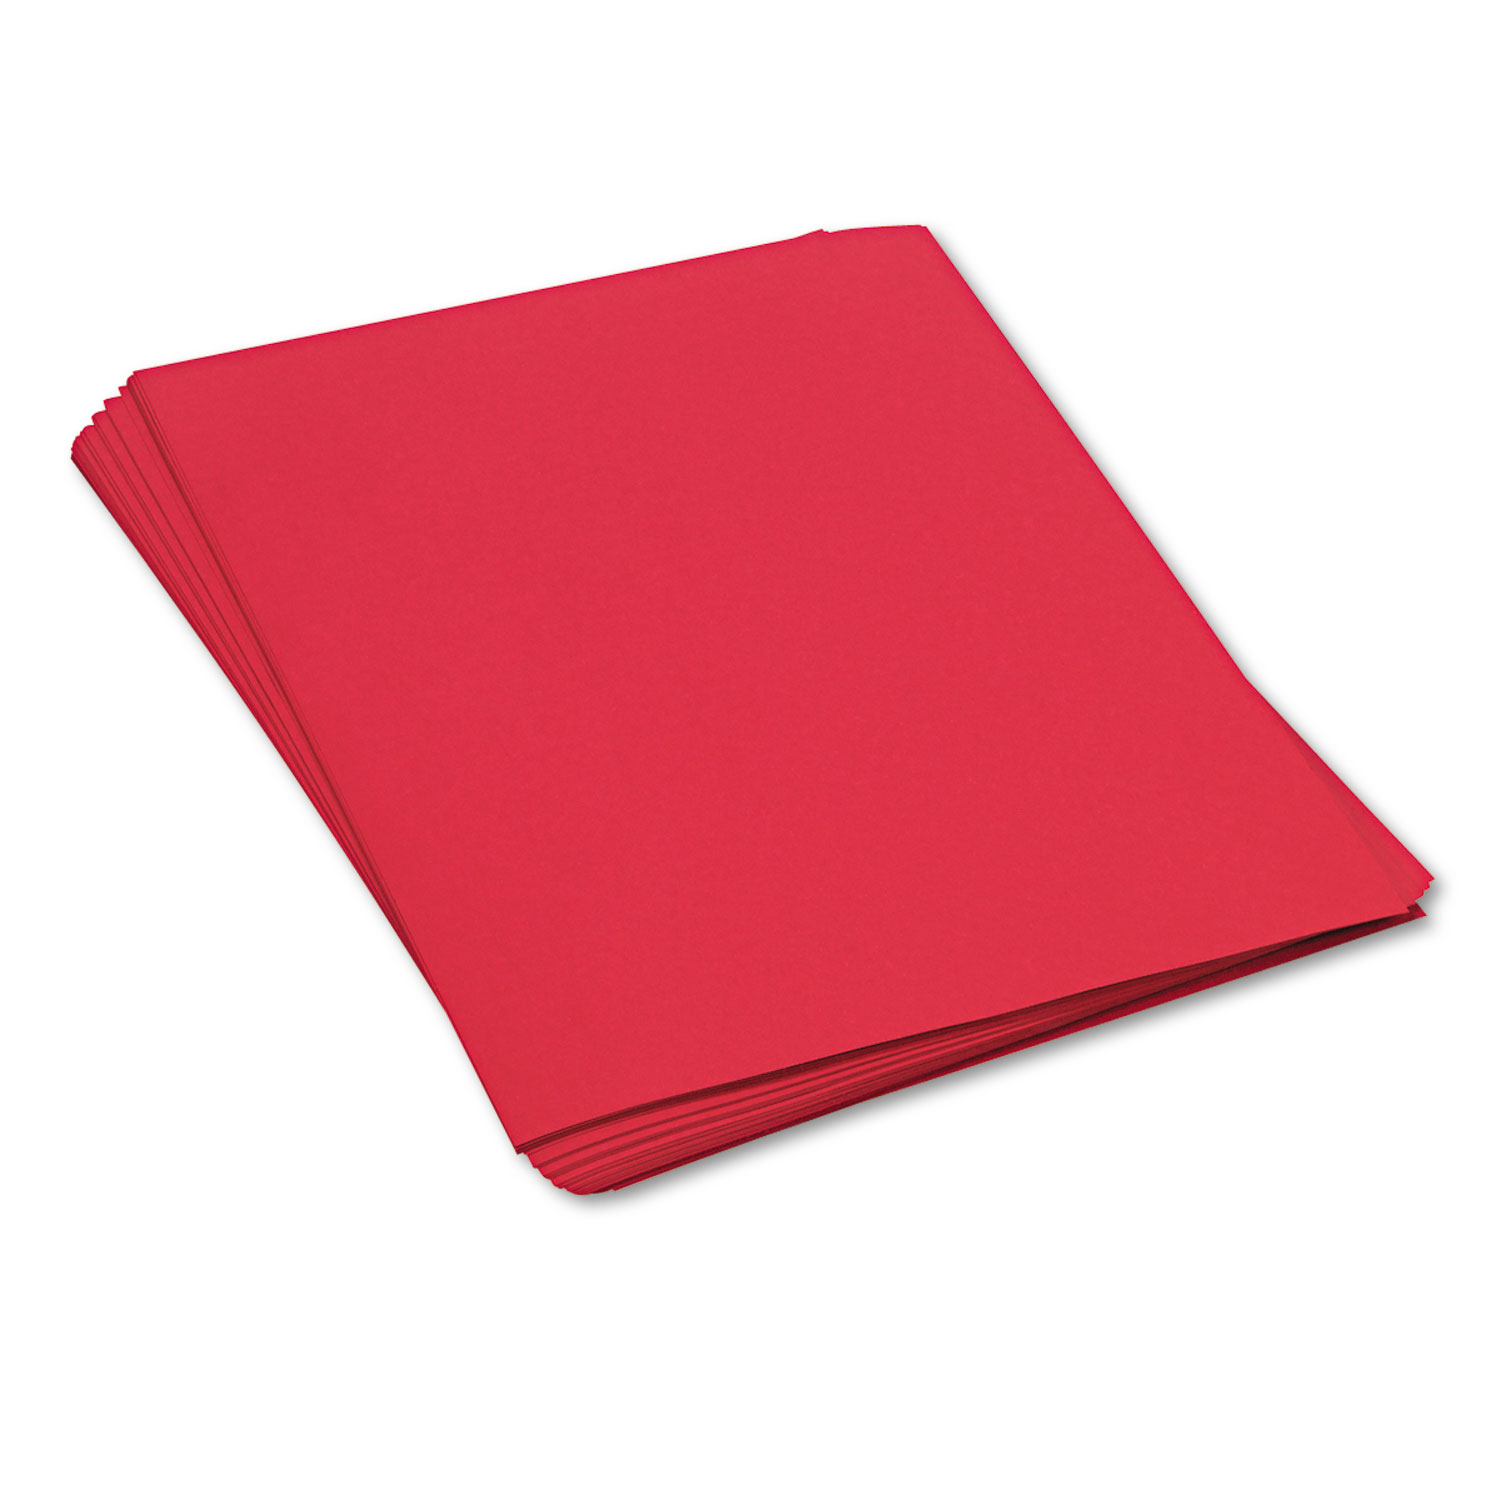 Construction Paper, 58 lbs., 18 x 24, Holiday Red, 50 Sheets/Pack